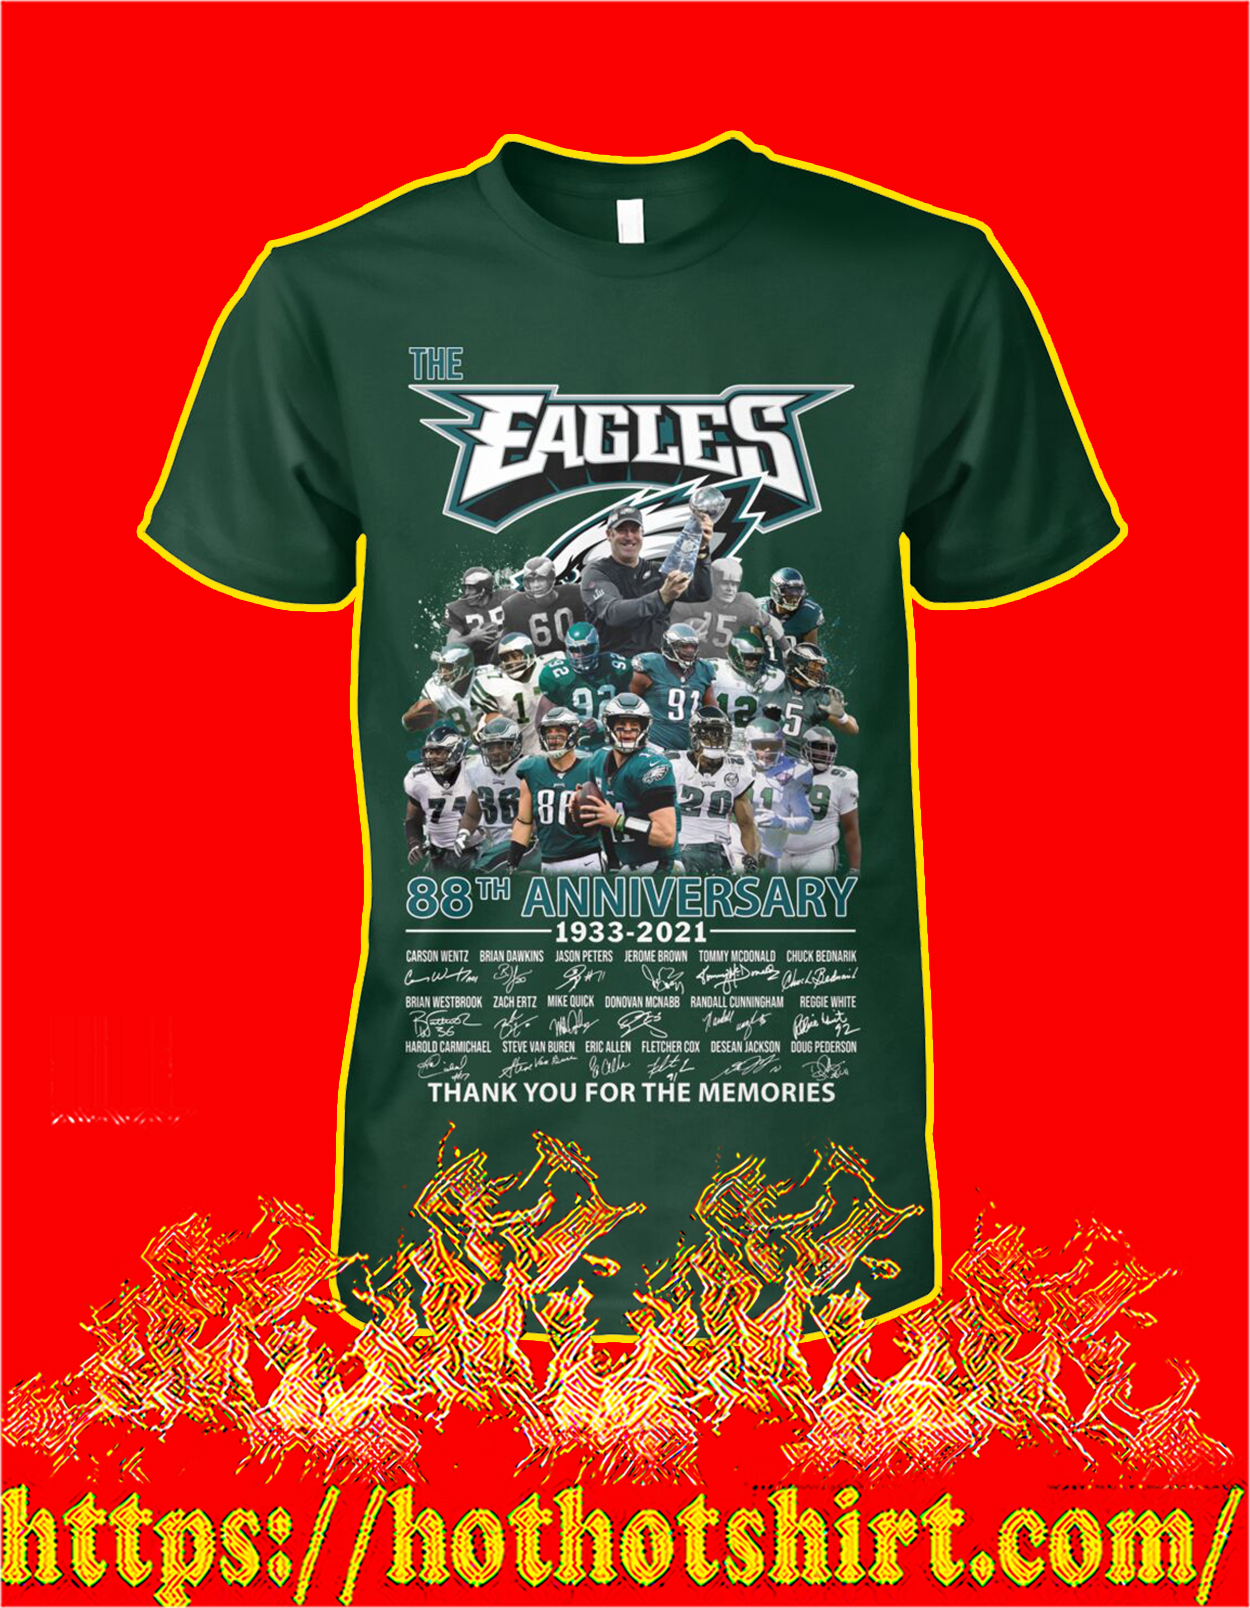 The eagles 88th anniversary thank you for the memories shirt, hoodie and sweatshirt